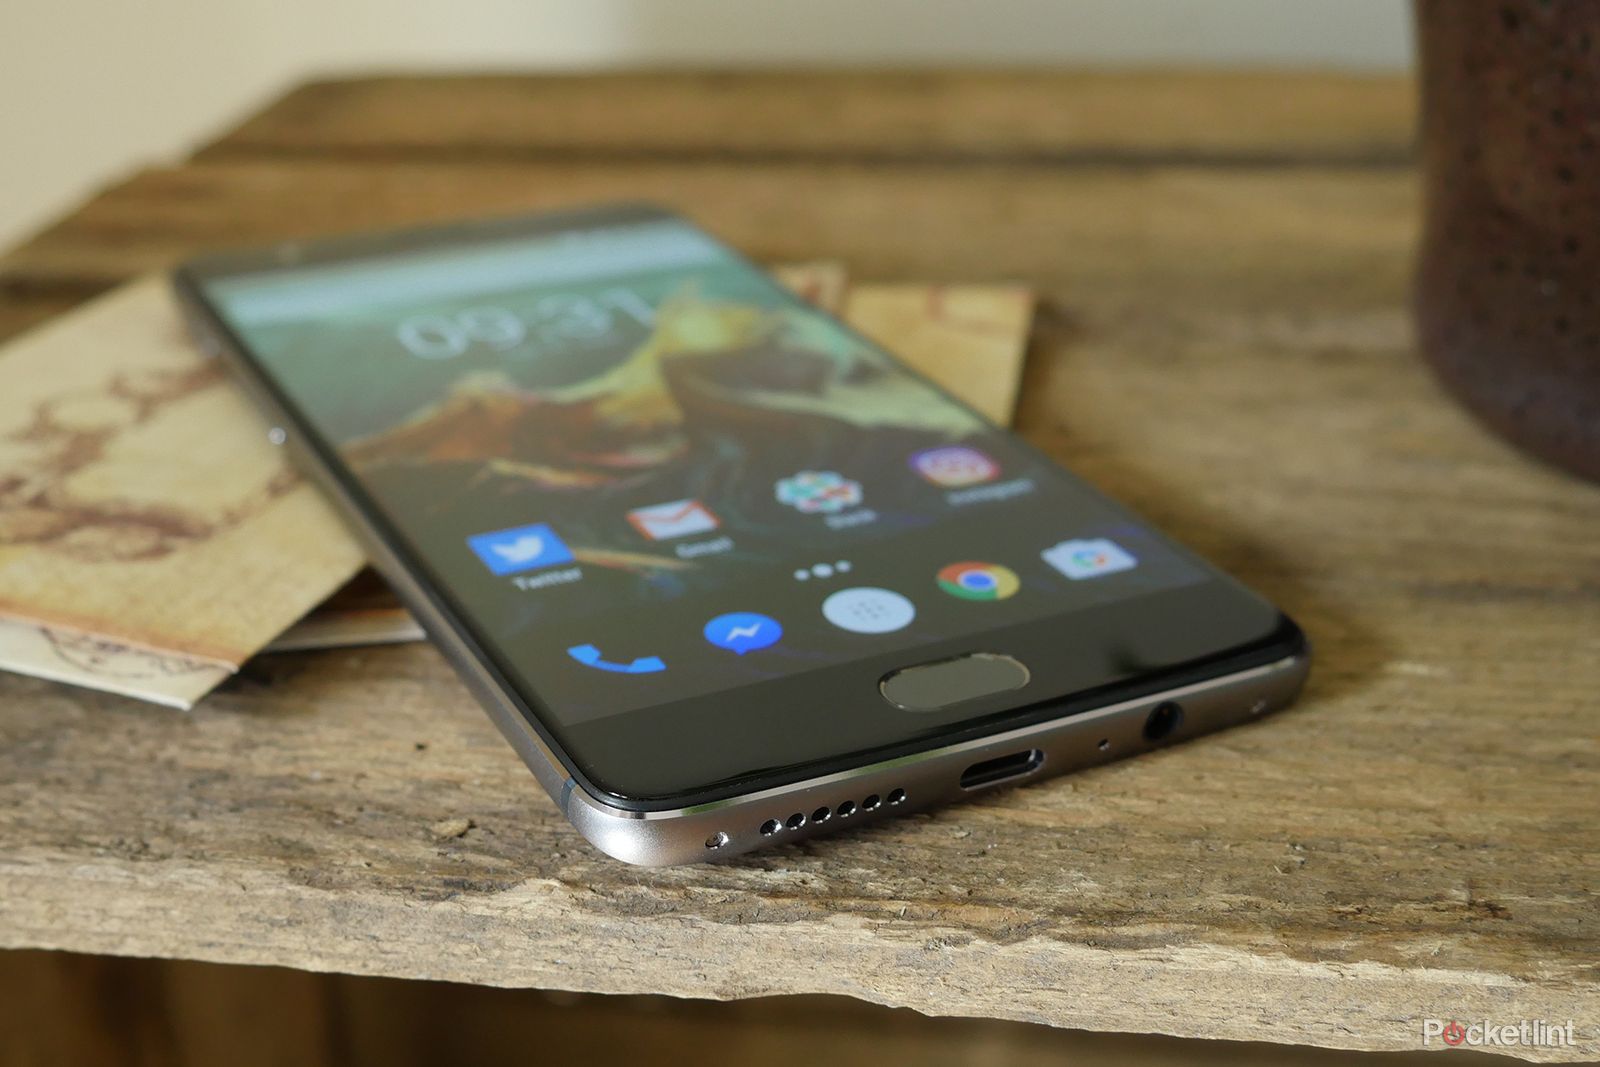 oneplus 3 oxygenos 3 2 0 update pulled after causing upgrade issues image 1